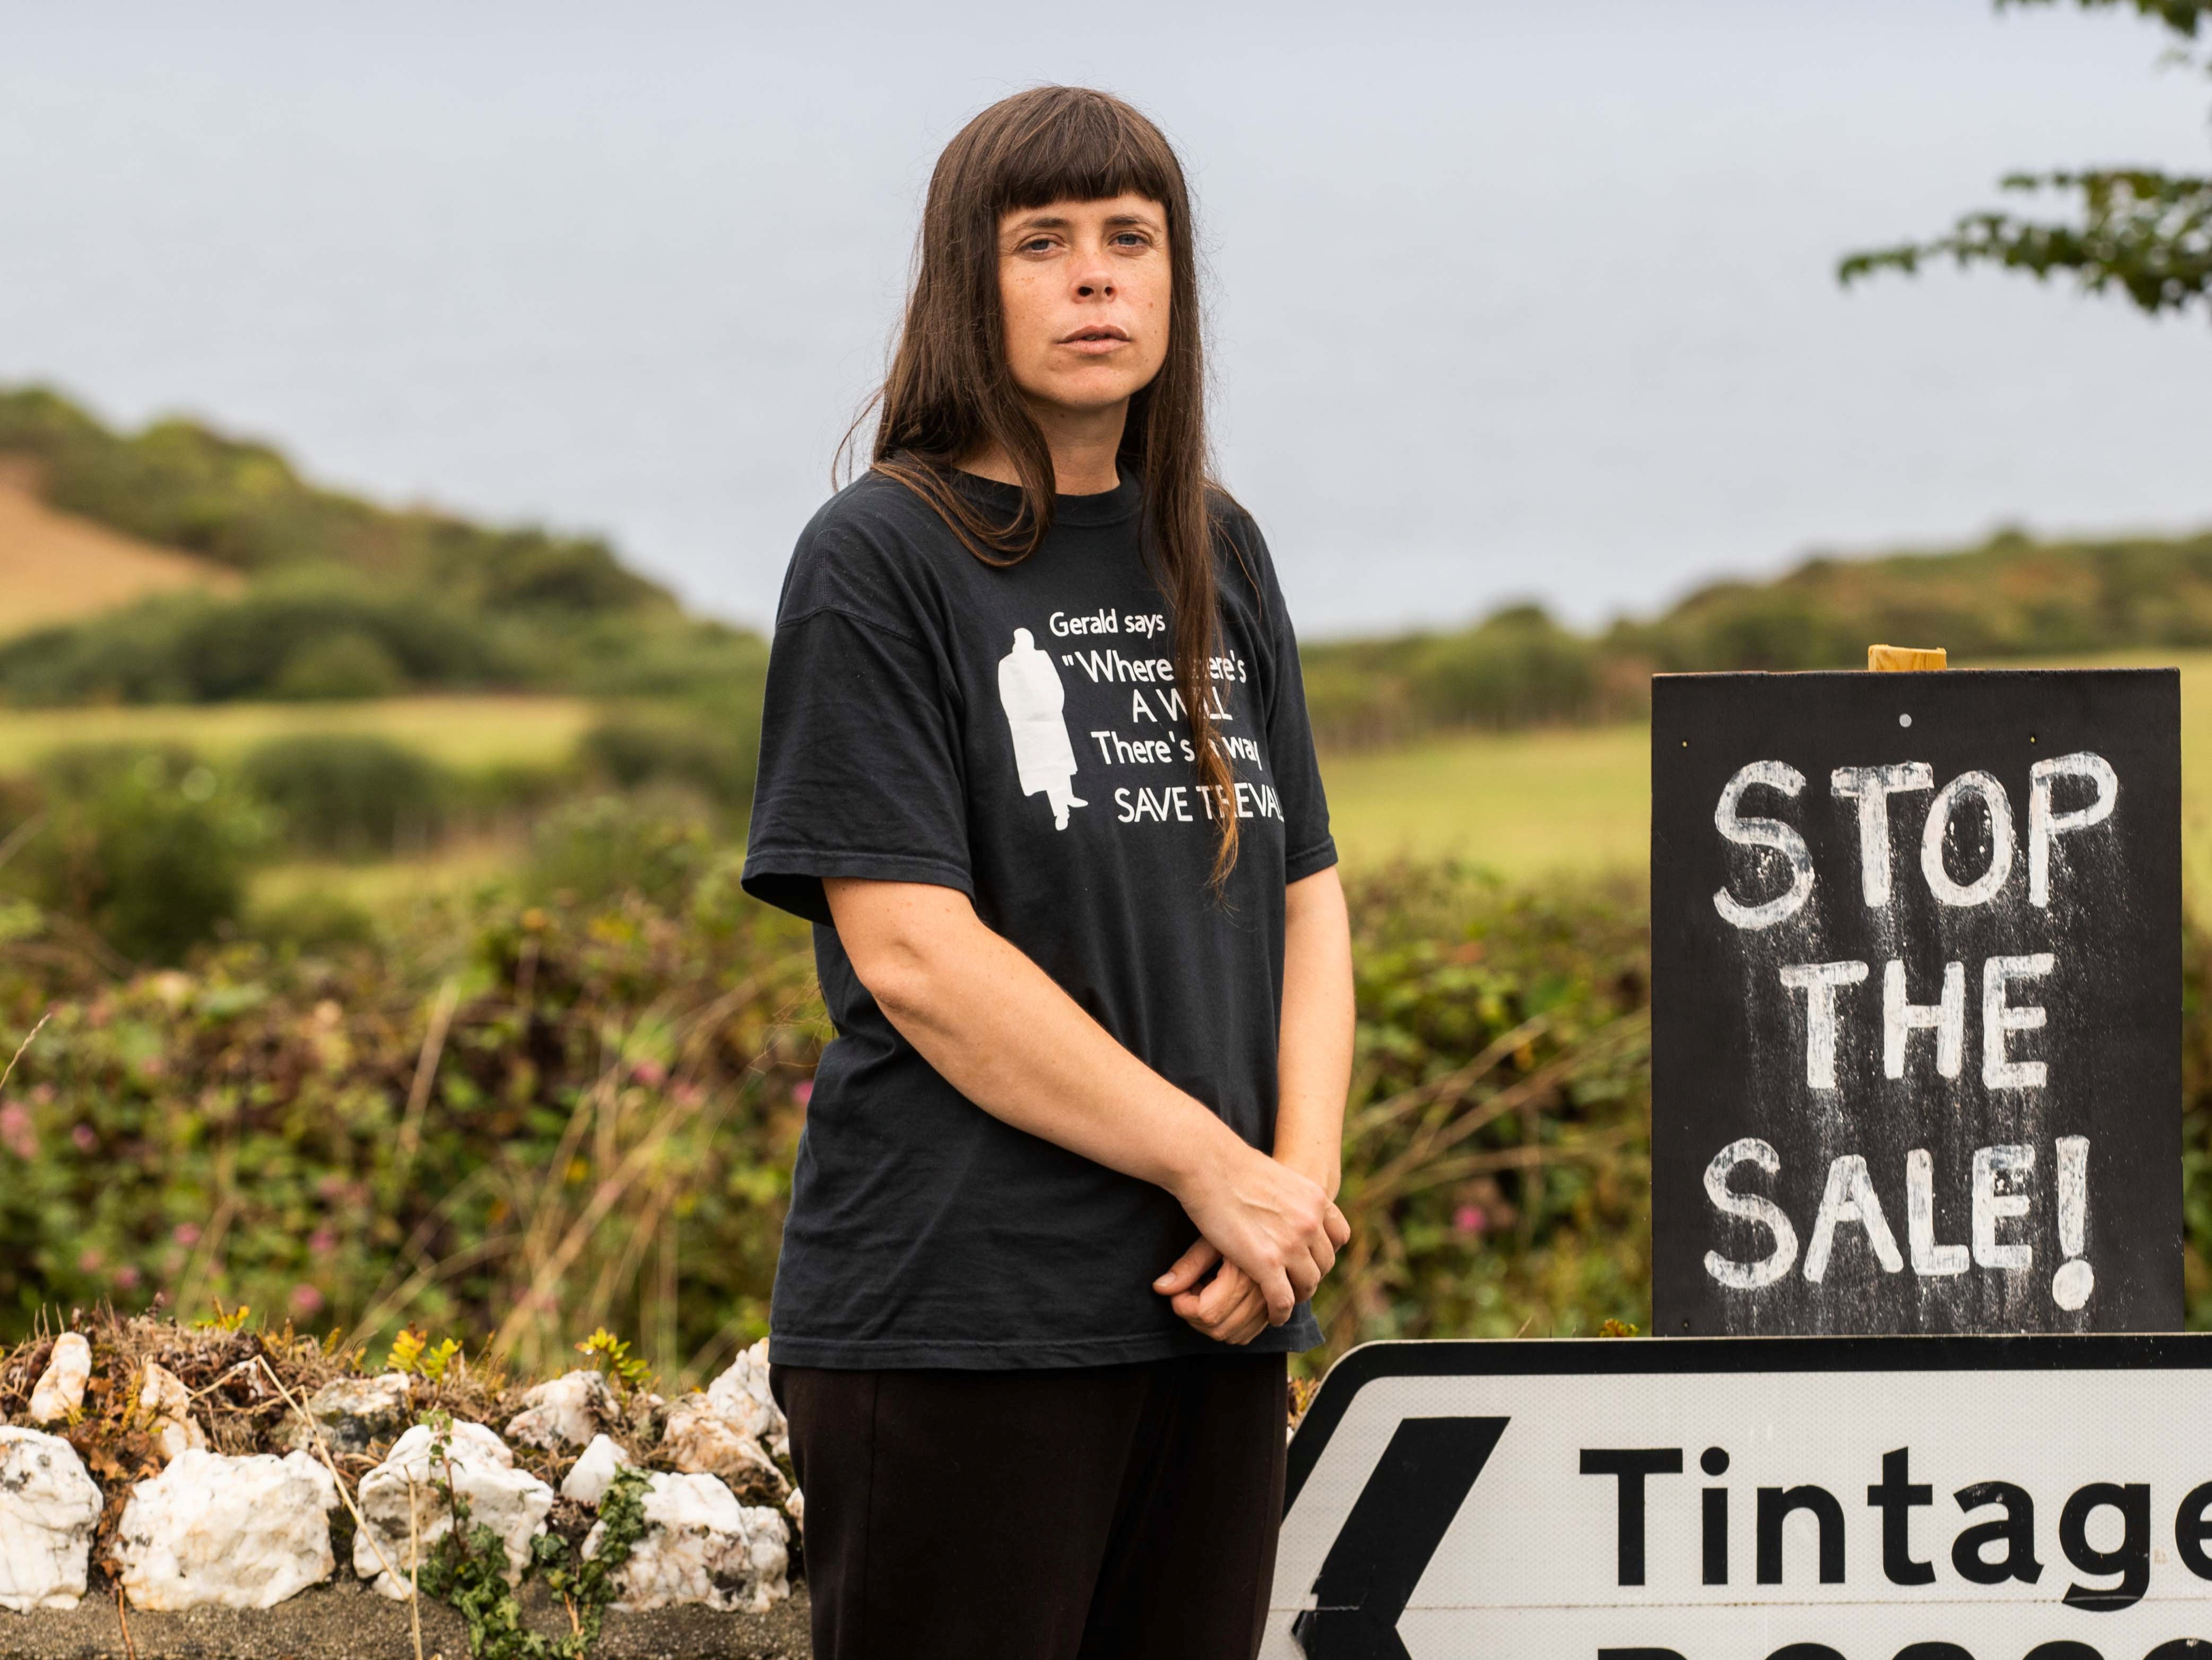 Residents facing eviction from the Cornish village of Trevalga have vowed to do ‘whatever it takes’ to stop its sale